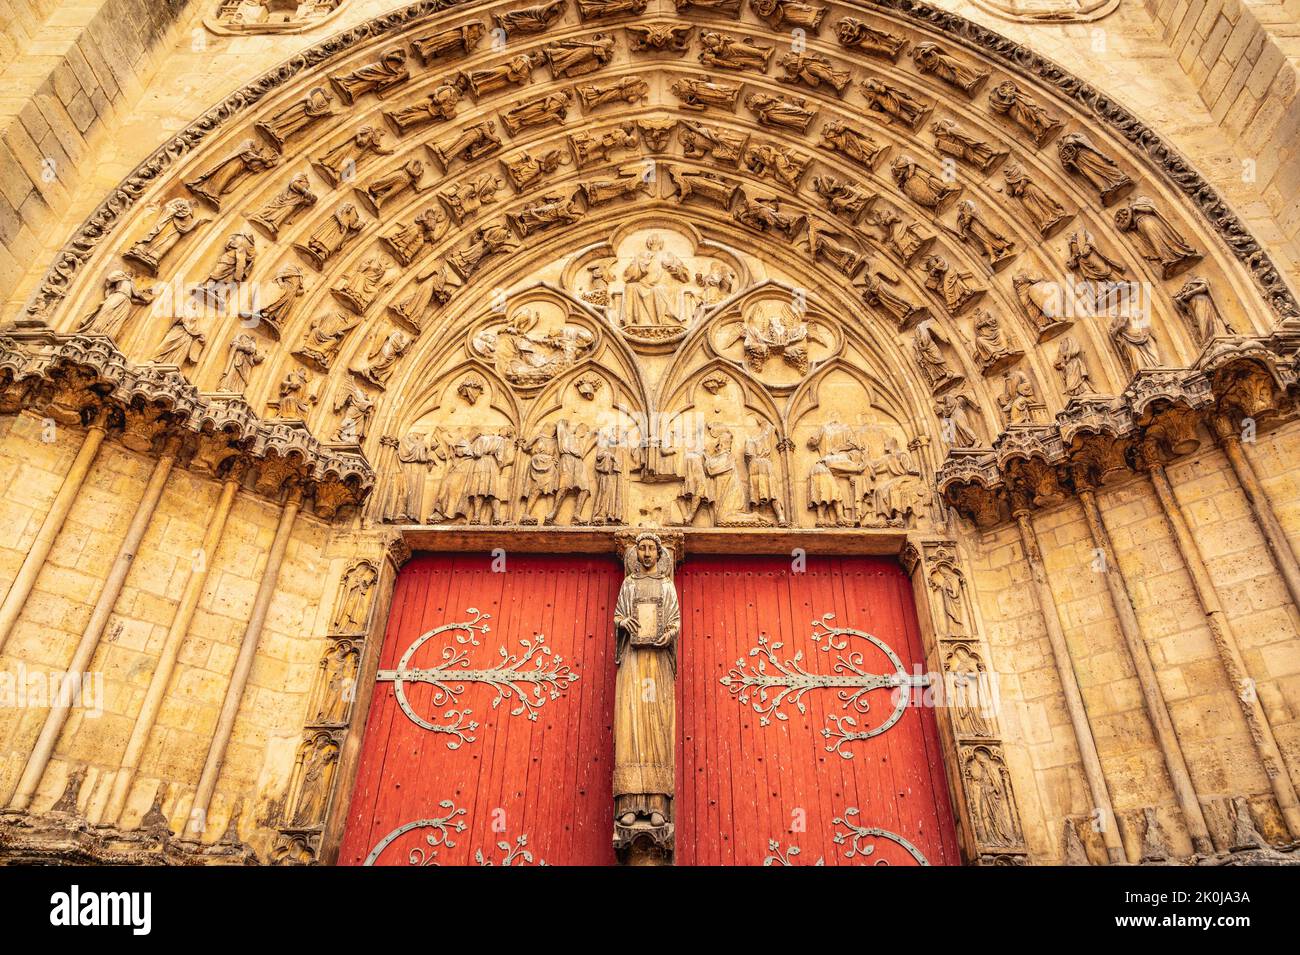 Statue-column of Saint Stephen, west facade (1190-1200) of France's first Gothic cathedral in Sens, Burgundy Stock Photo